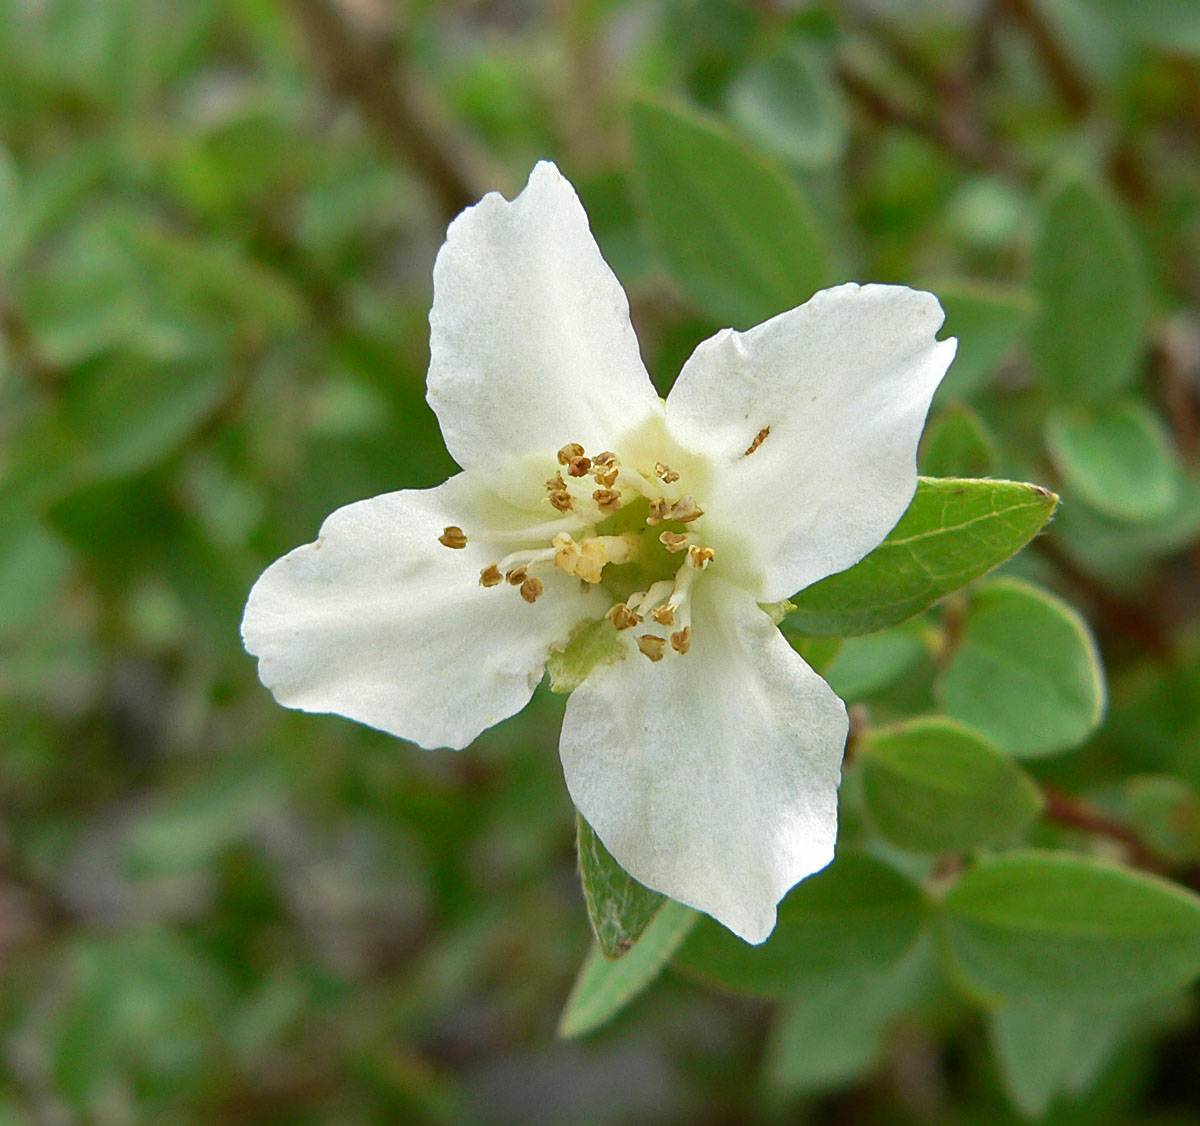 small, white flower with white filaments, brown anthers, and green leaves